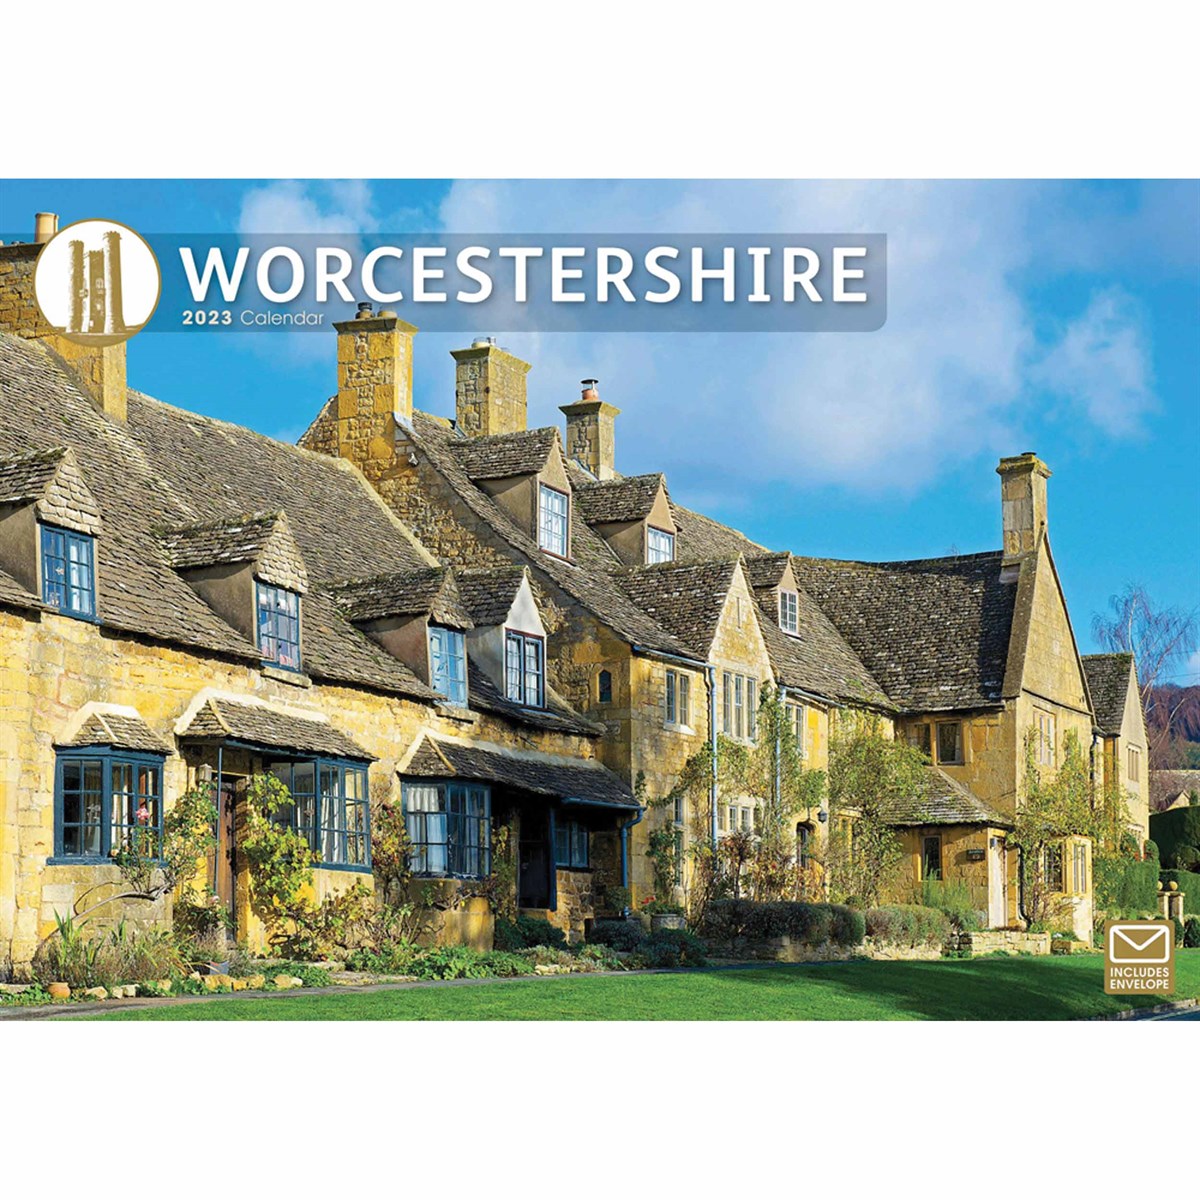 Worcestershire A4 2023 Calendars